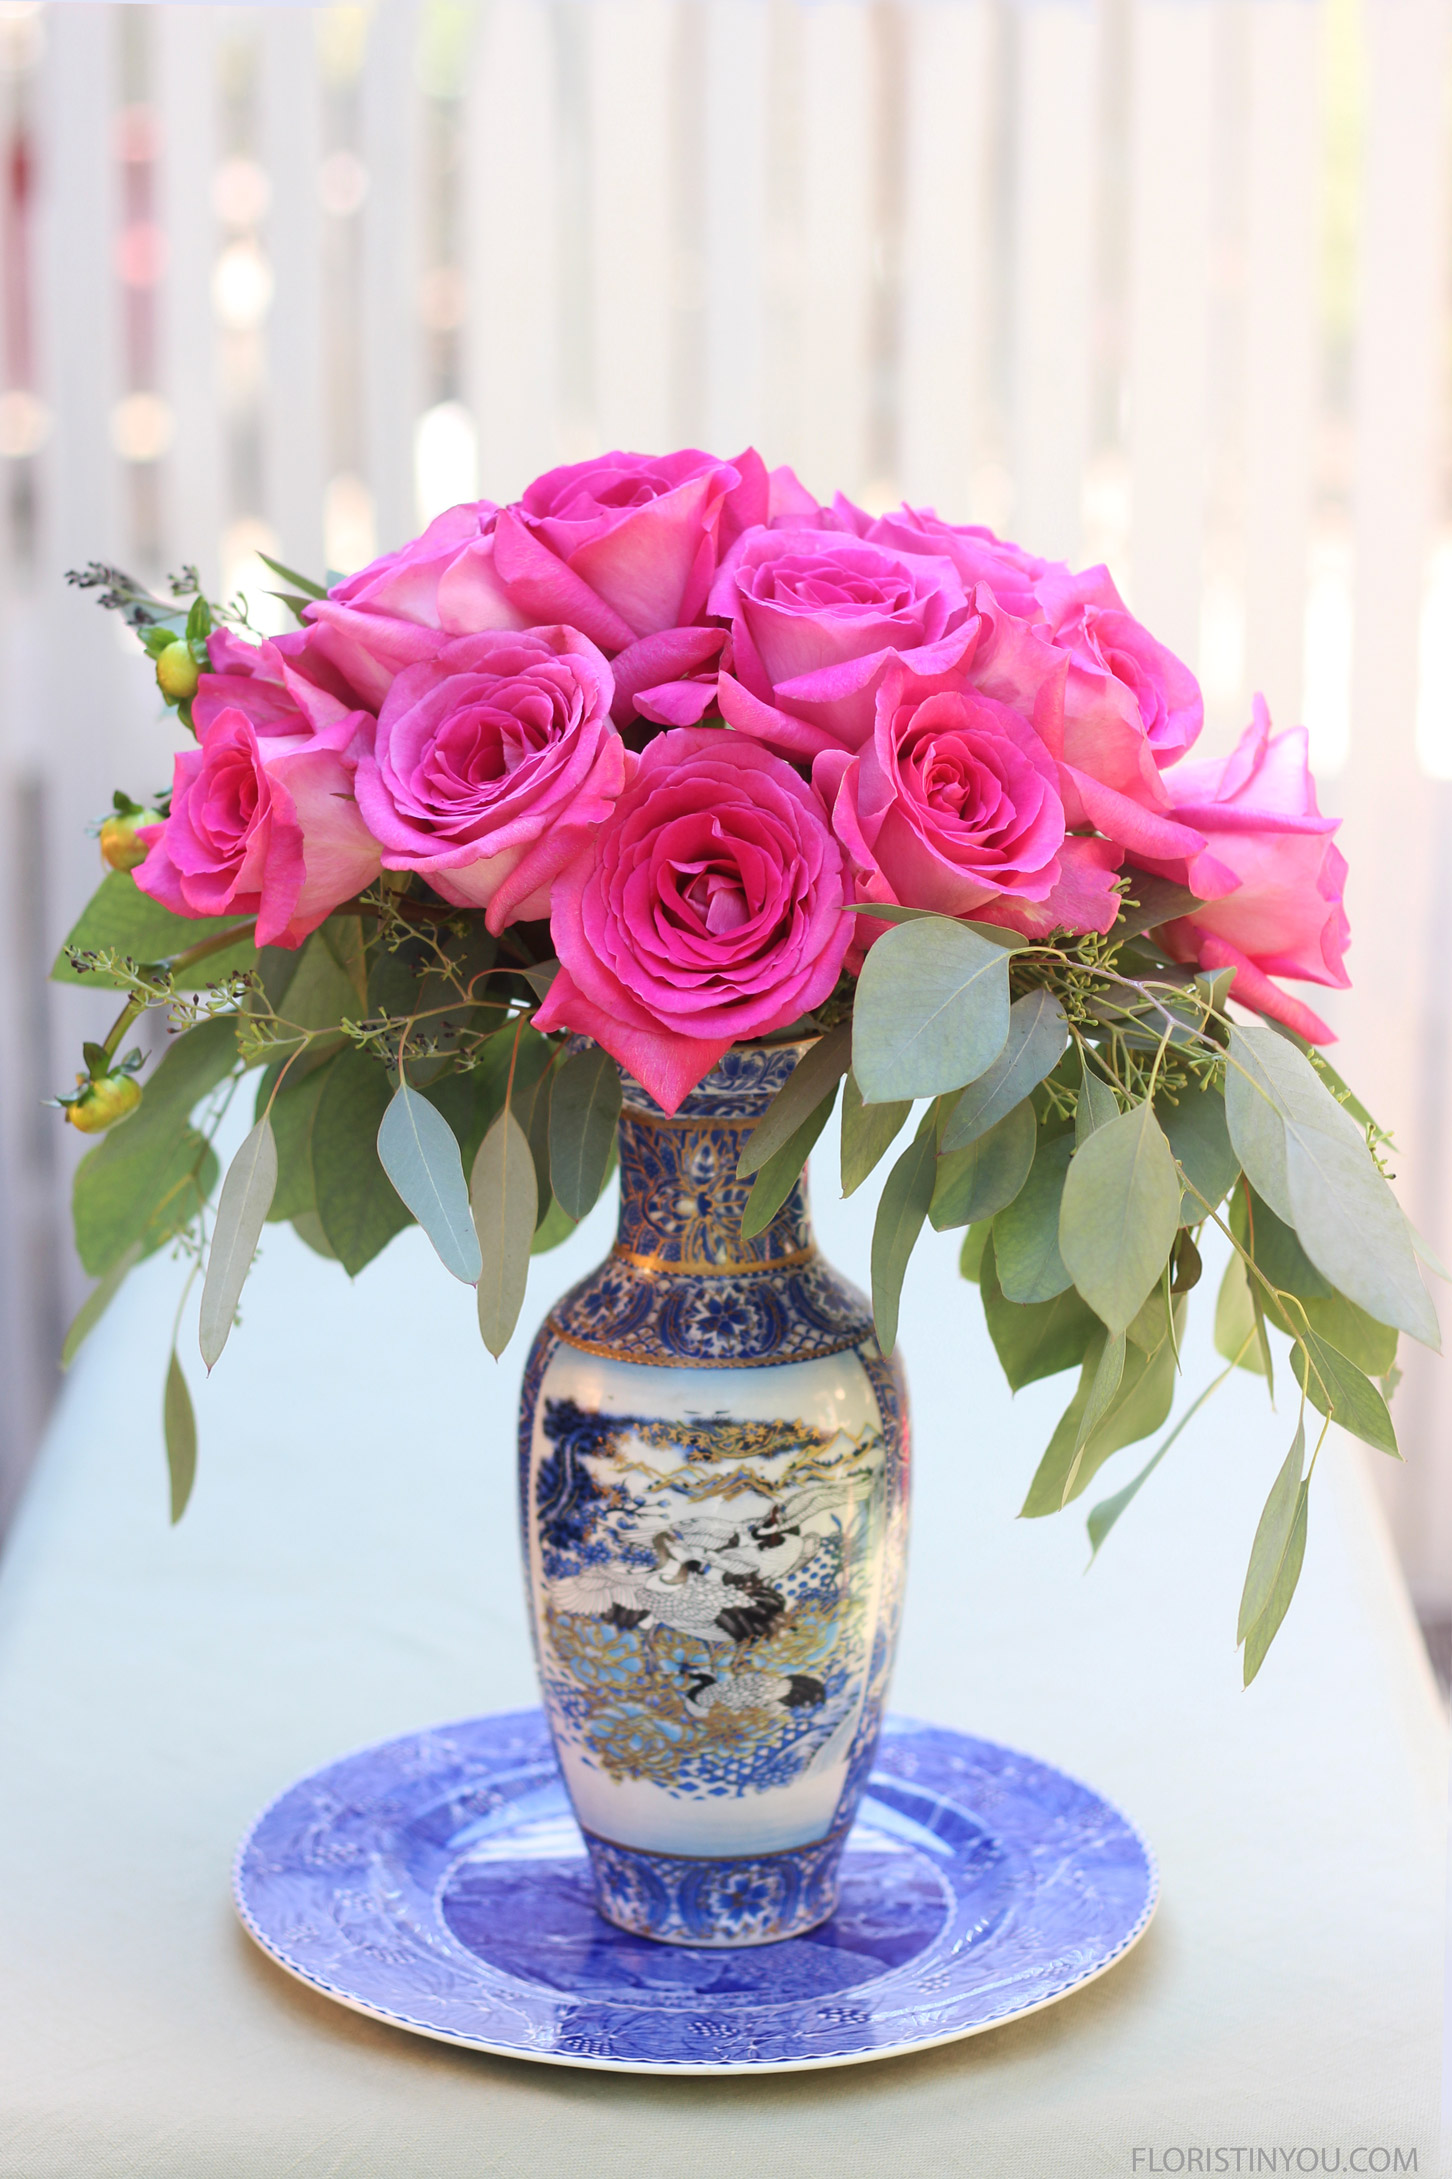 Roses in a Blue & White Tall Vase